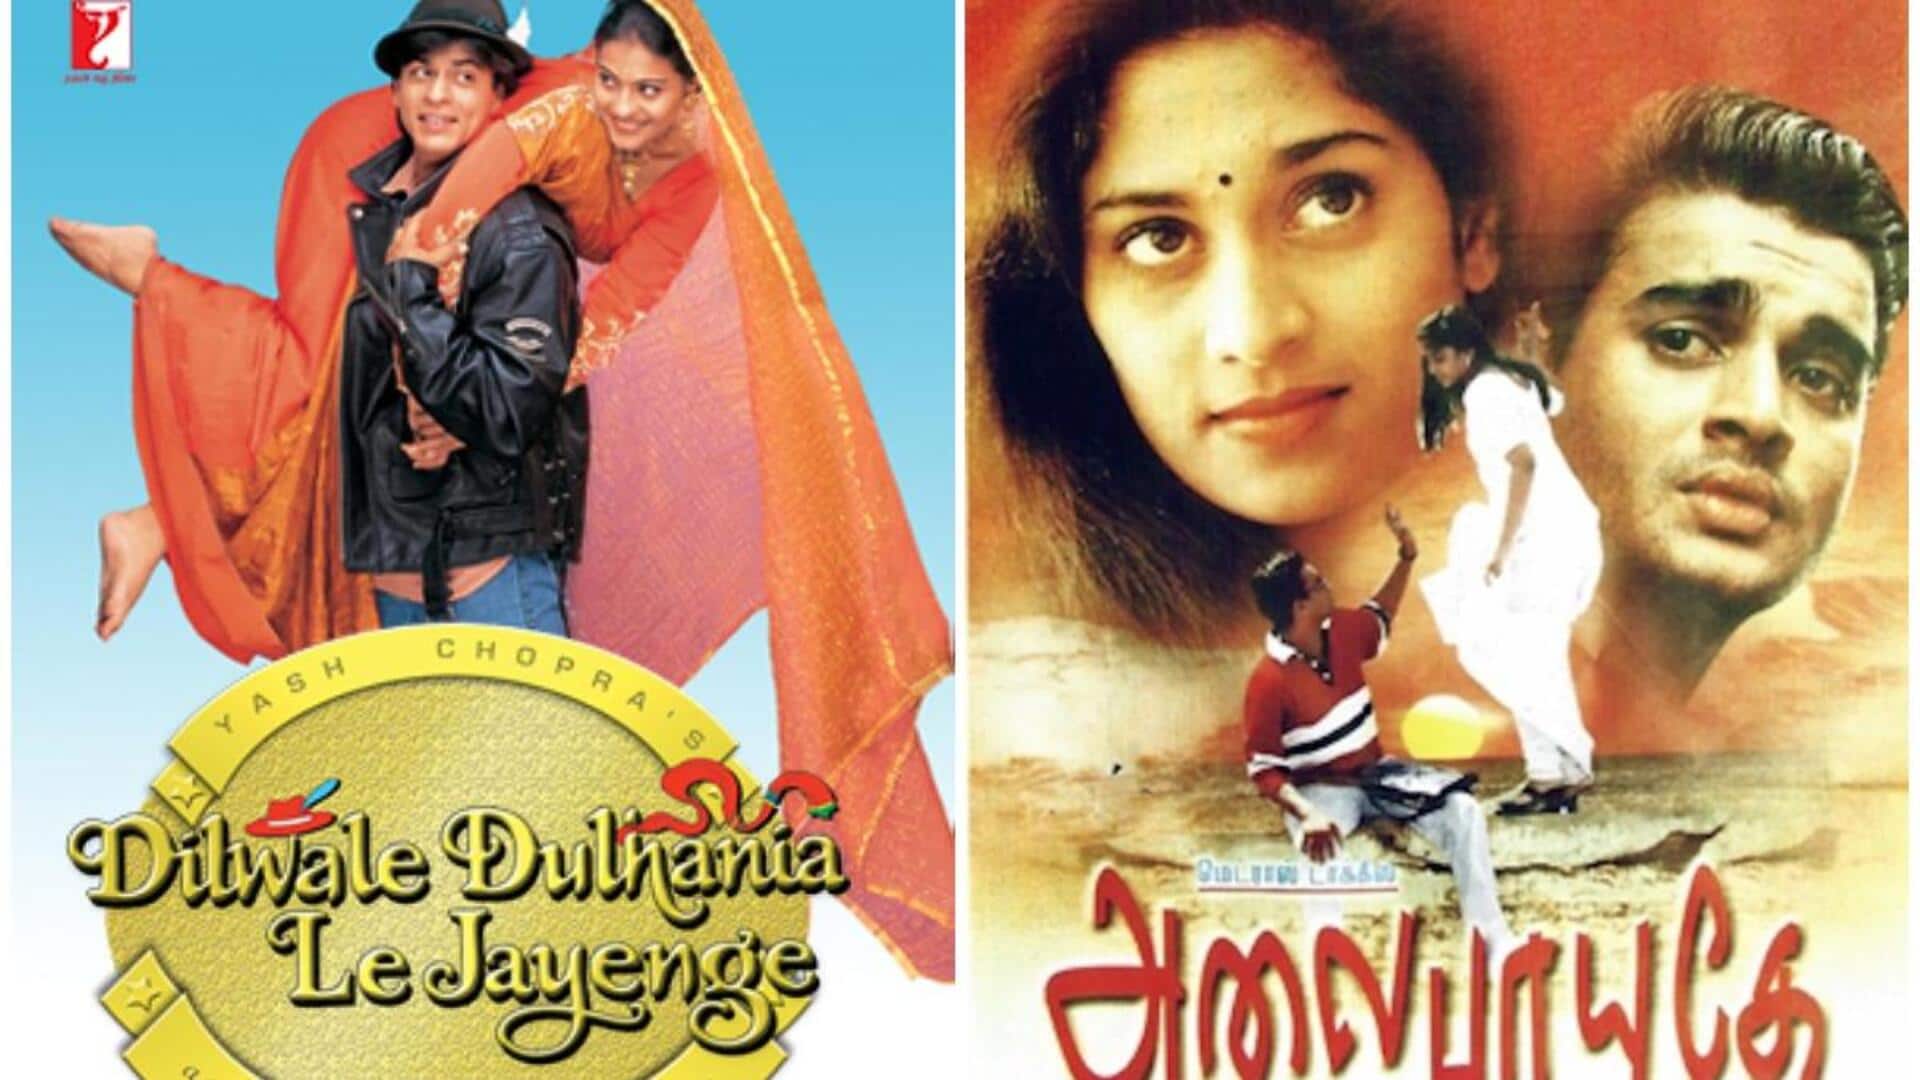 Valentine's Day special: Romantic films with pan-India appeal